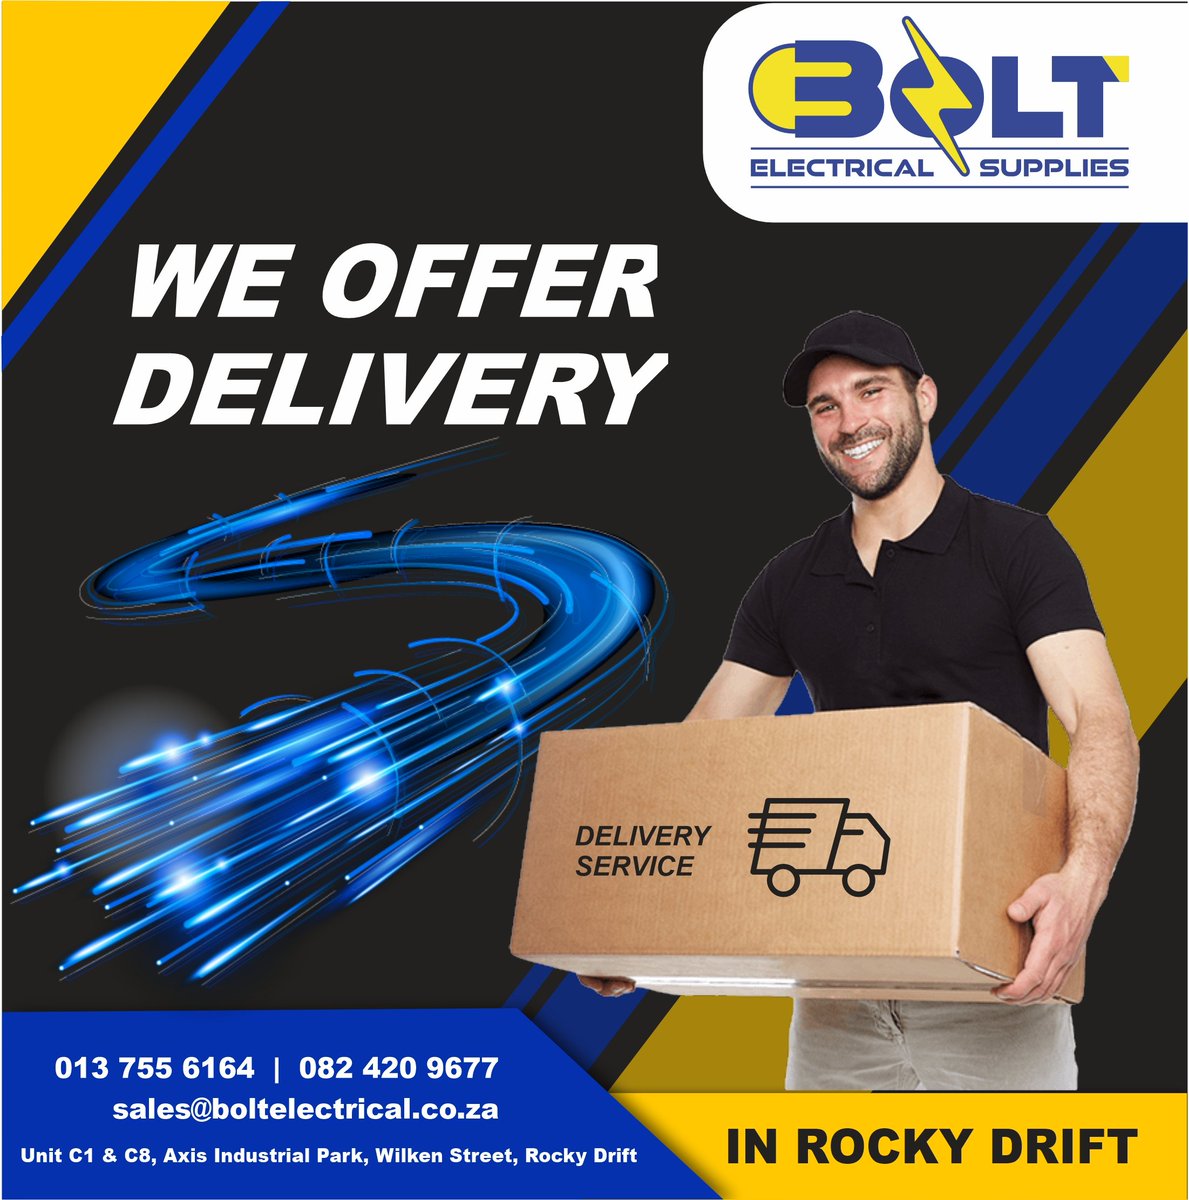 BOLT Electrical in Rocky Drift is conveniently located next to the R40.
Office: 013 755 6164 

#boltelectrical #solarenergy #hashtagonline
#electricity #electrical #electrician #energy #power #electric #electricians #electricalengineering #electricianlife #engineering #electrical